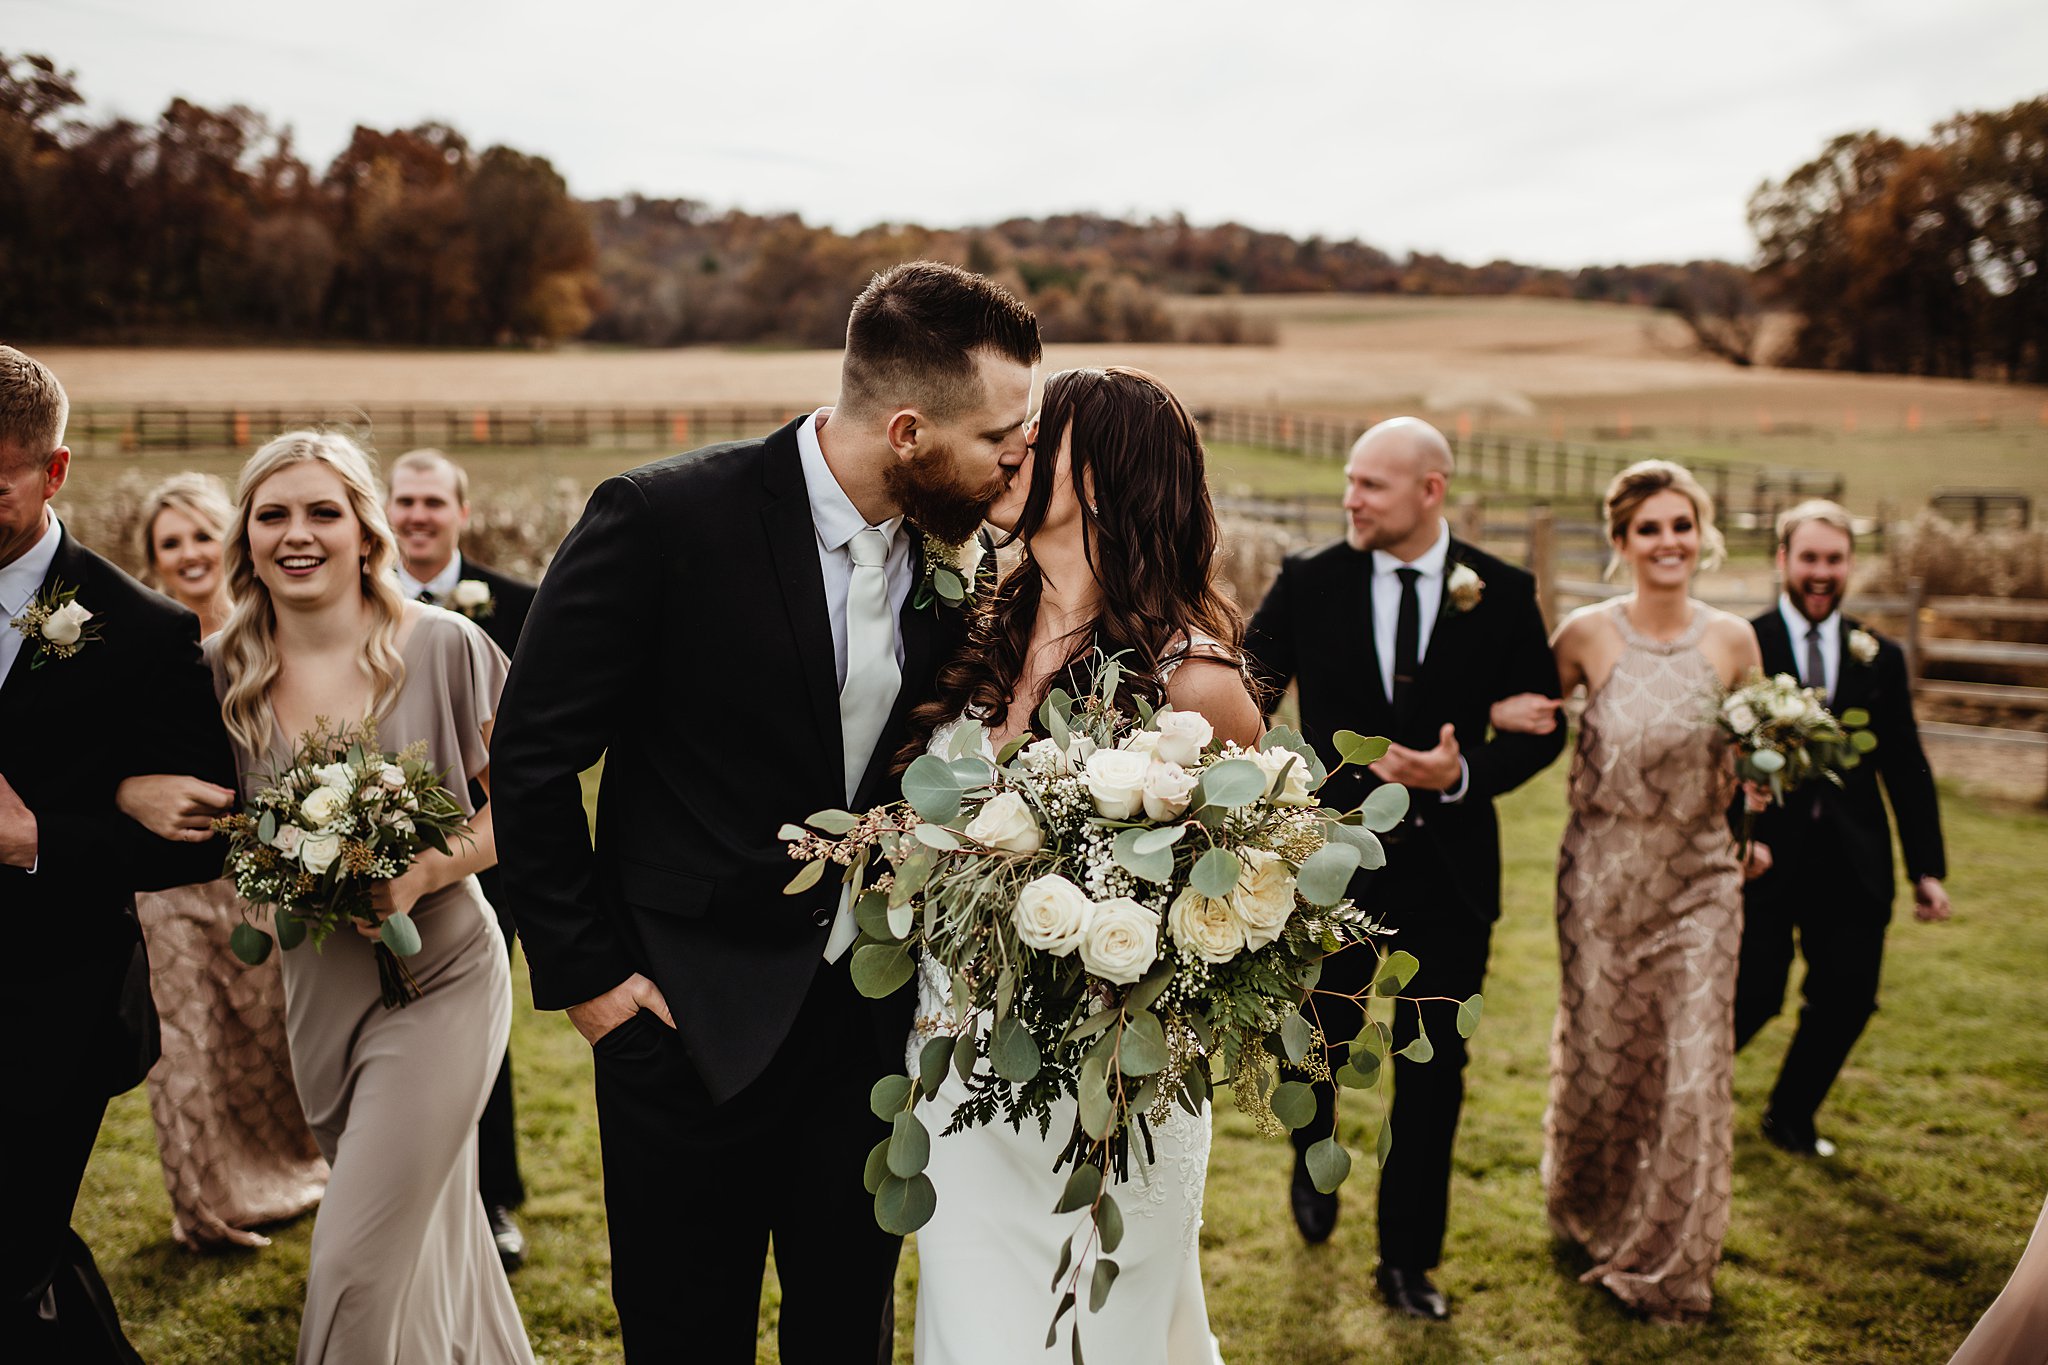 Whimsy and Charm: A Beautiful Wedding at On a Whim in Sparta, WI